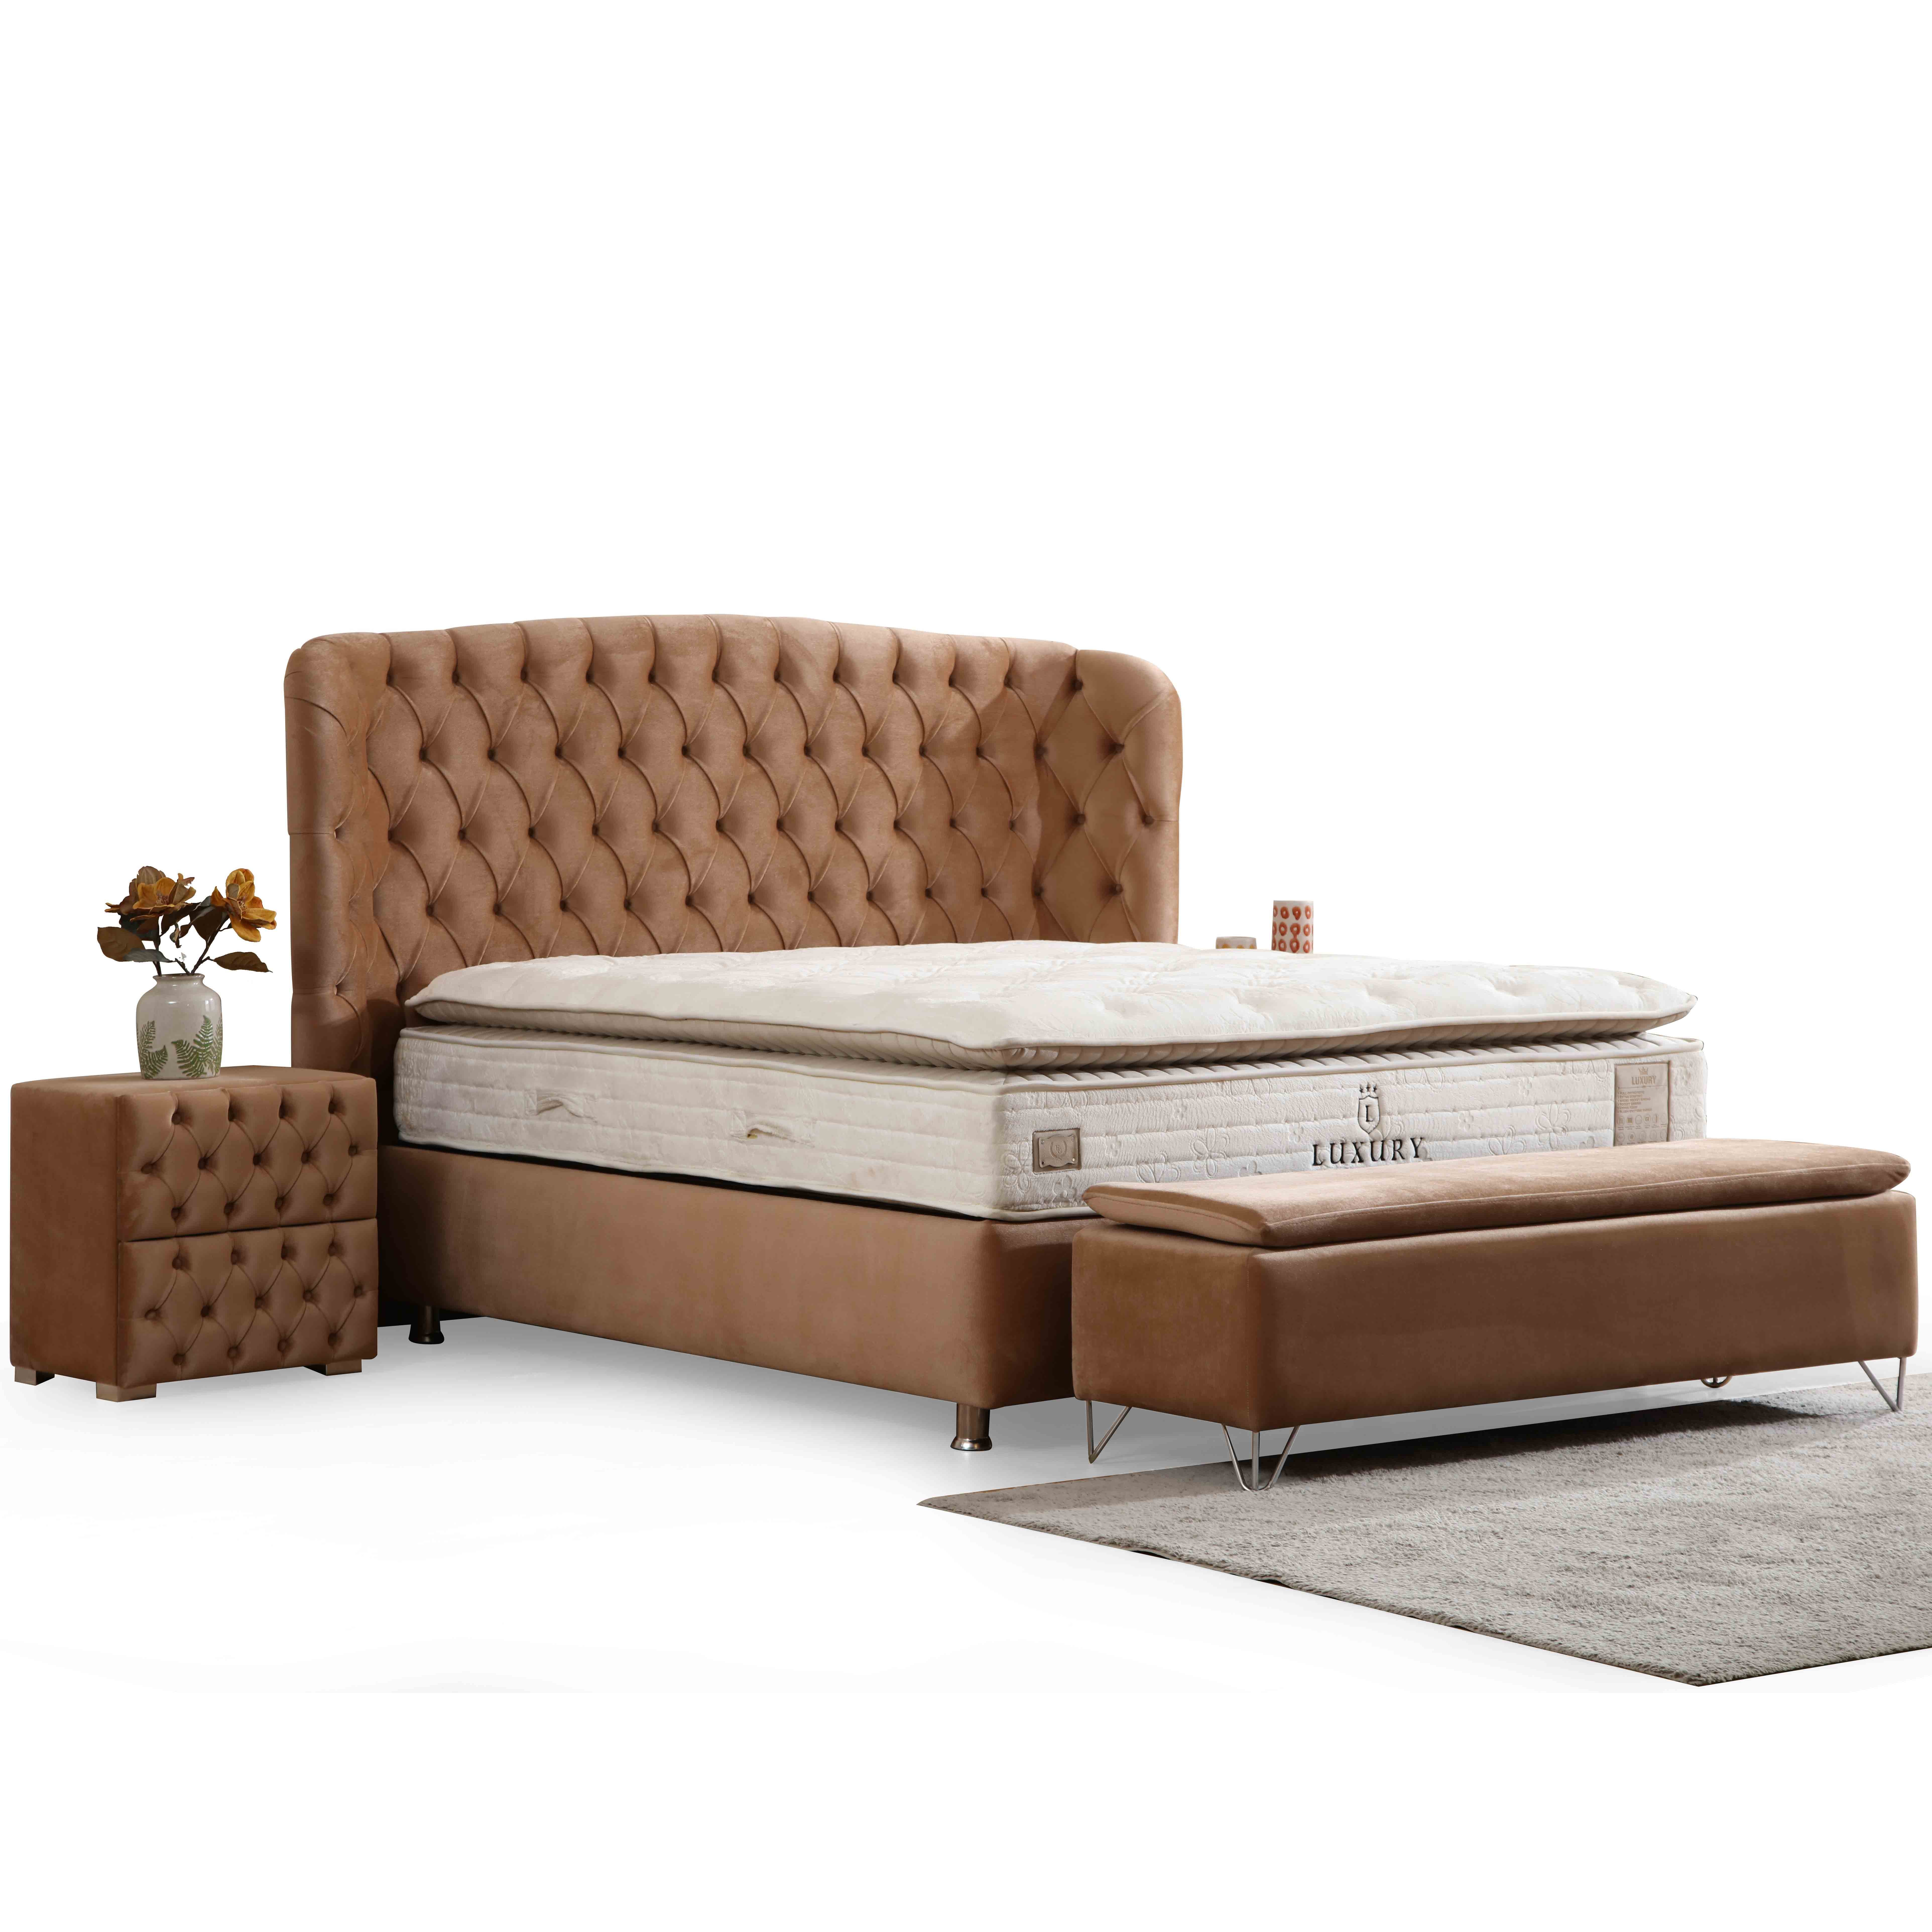 Riva Bedroom (Bed With Storage 140x190cm)